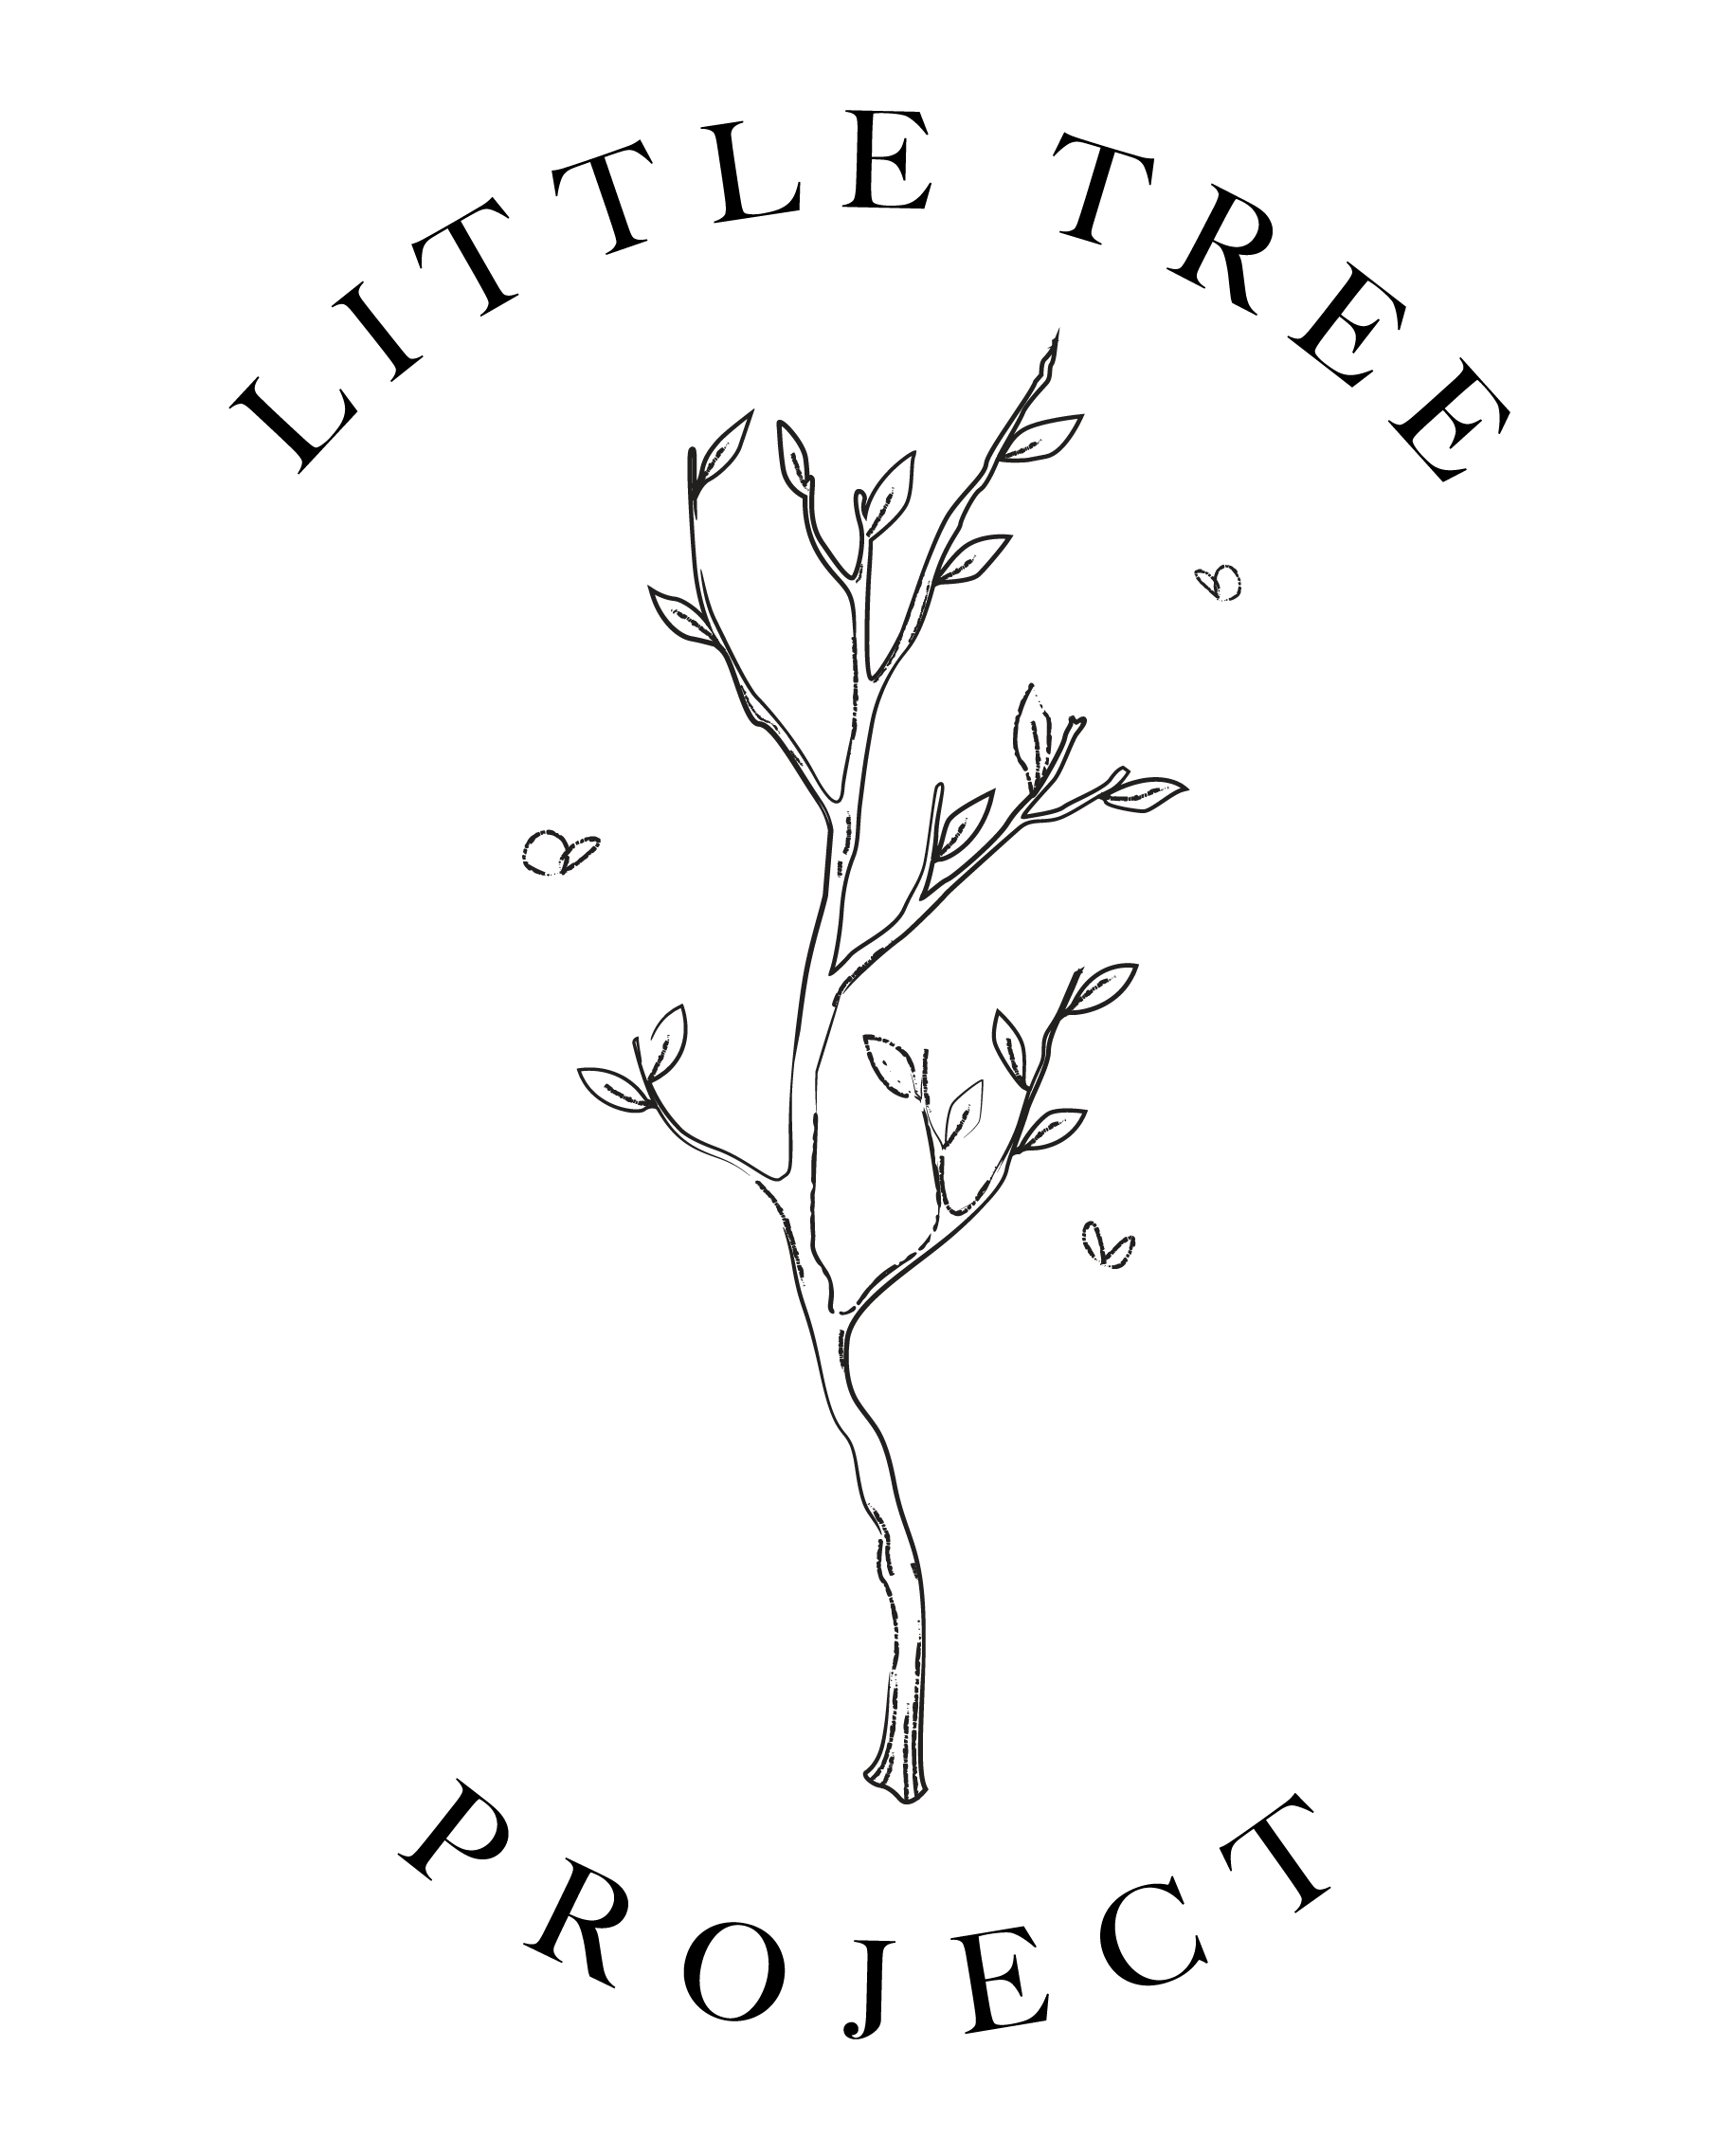 THE LITTLE TREE PROJECT